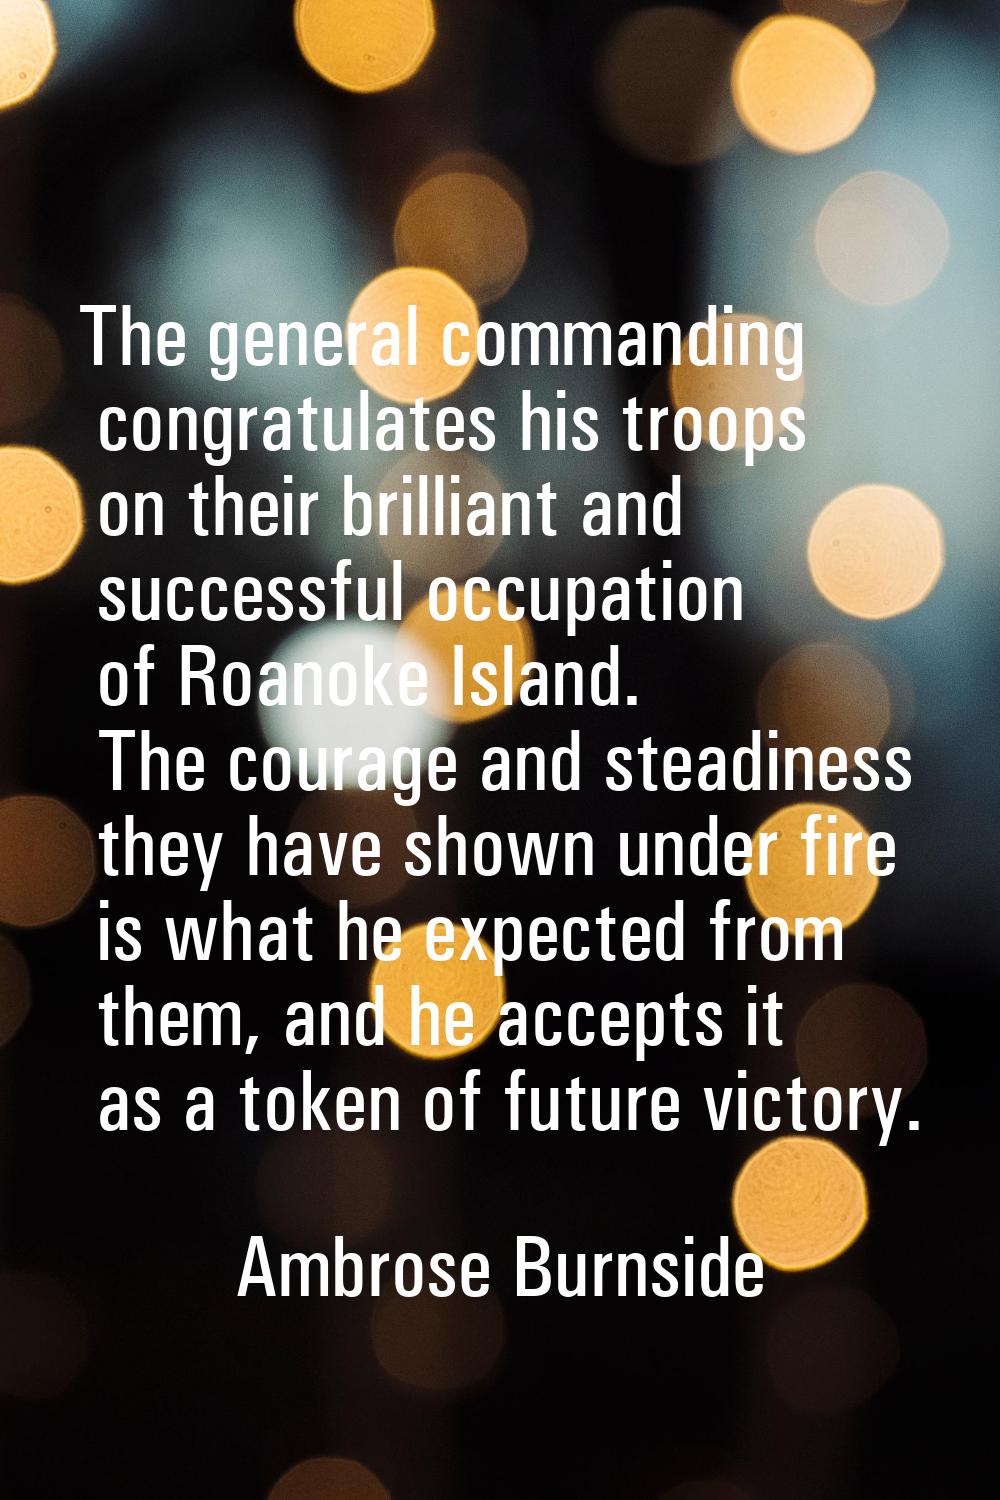 The general commanding congratulates his troops on their brilliant and successful occupation of Roa